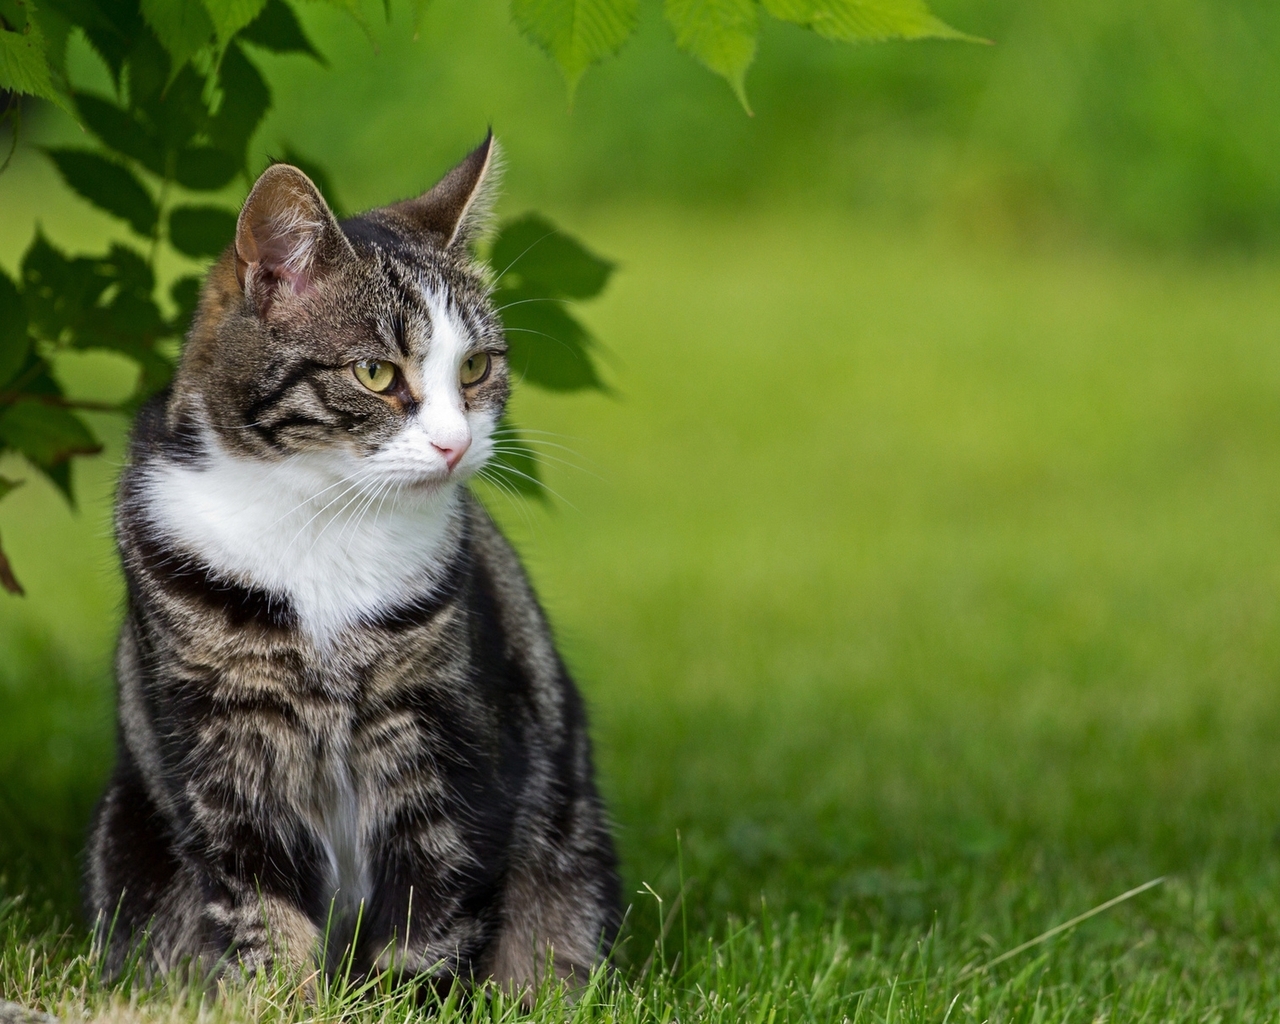 Image: Cat, wool, sitting, look, leaves, grass, nature, summer